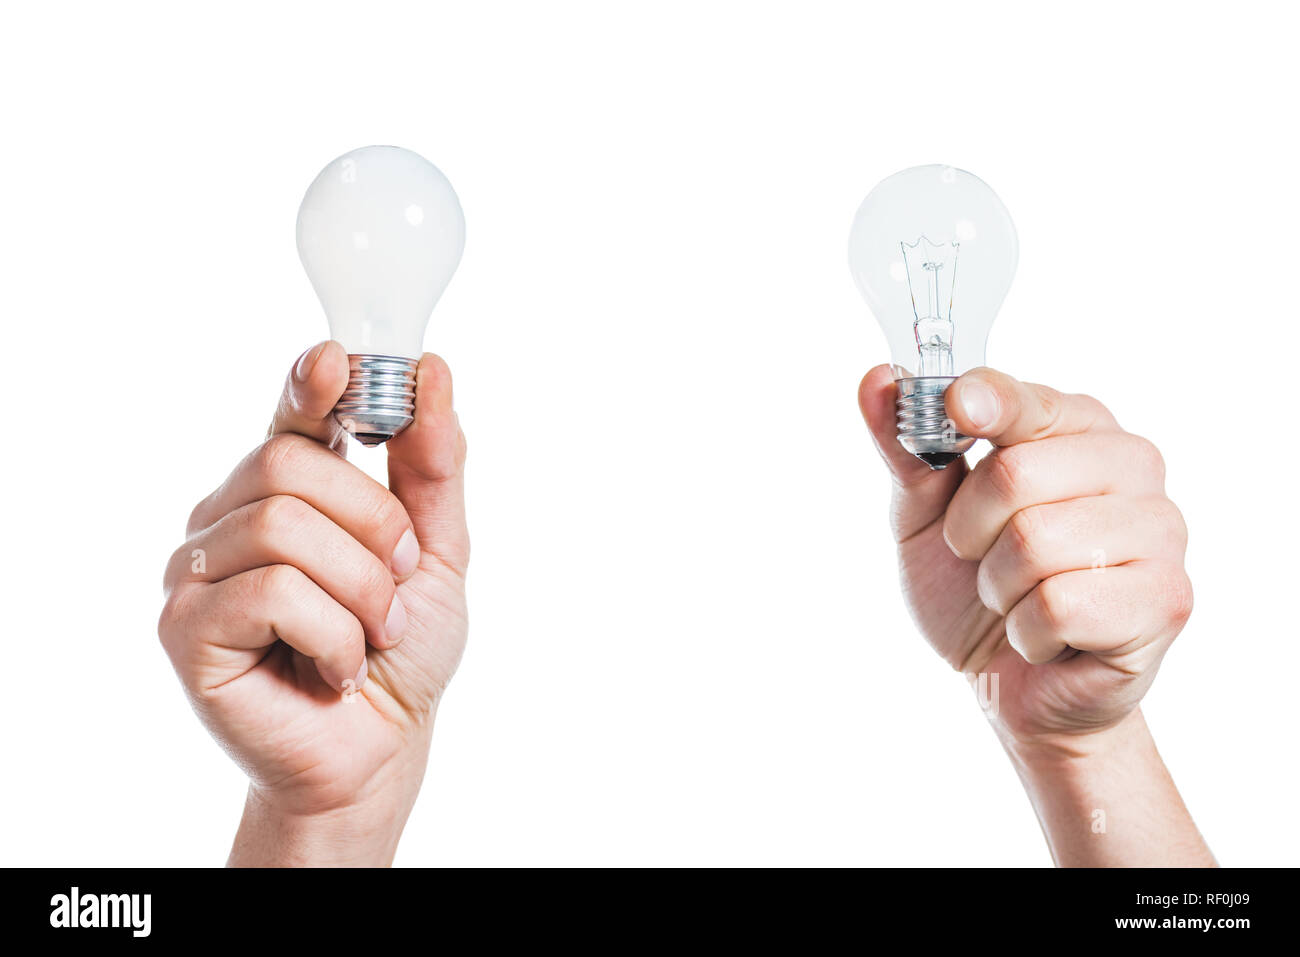 cropped view of male hands holding led lamps in hands isolated on white, energy efficiency concept Stock Photo